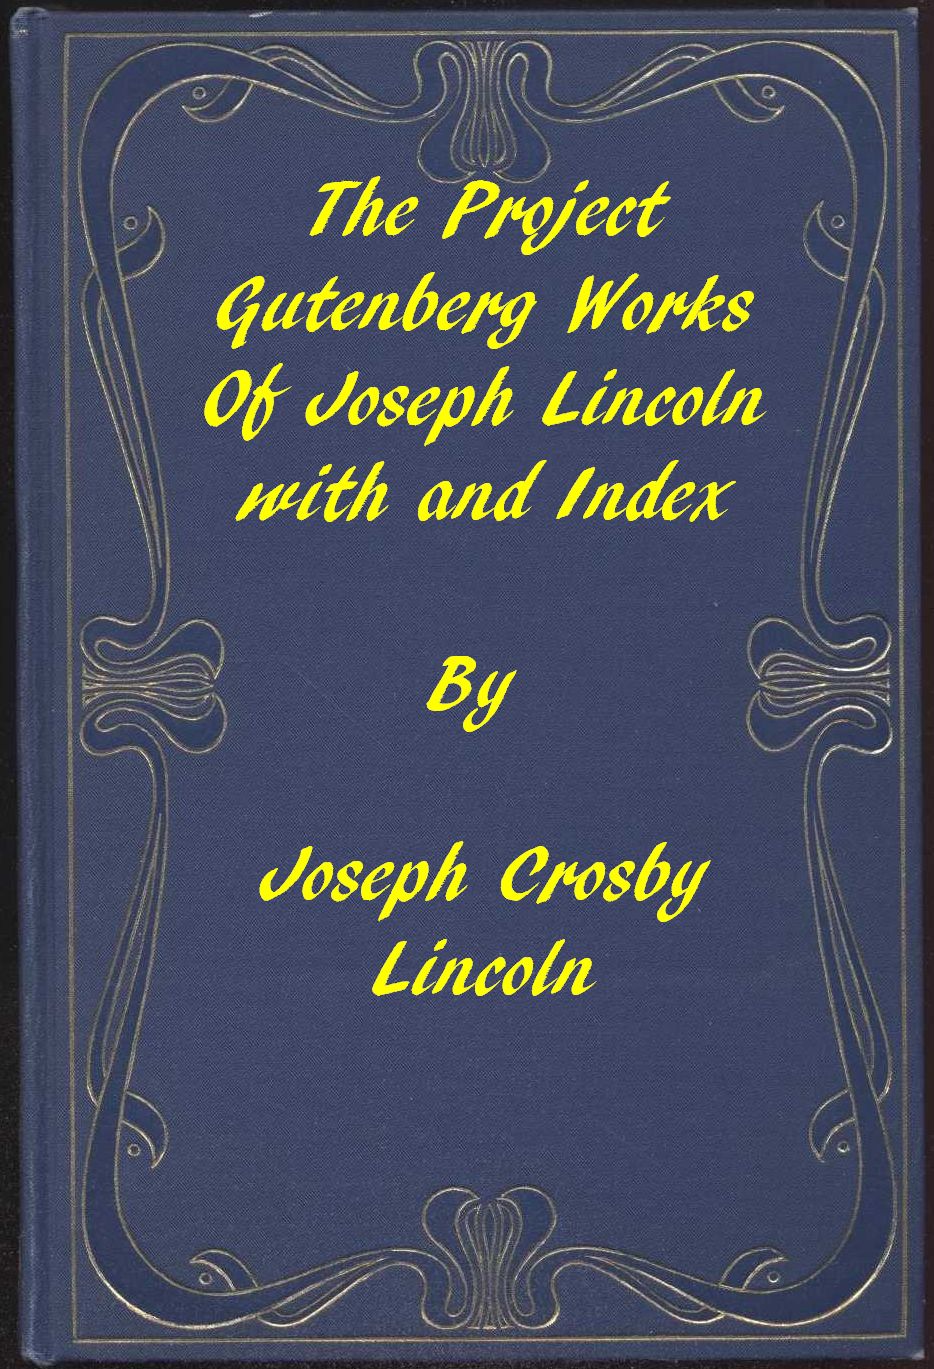 The Project Gutenberg Works of Joseph Lincoln: An Index